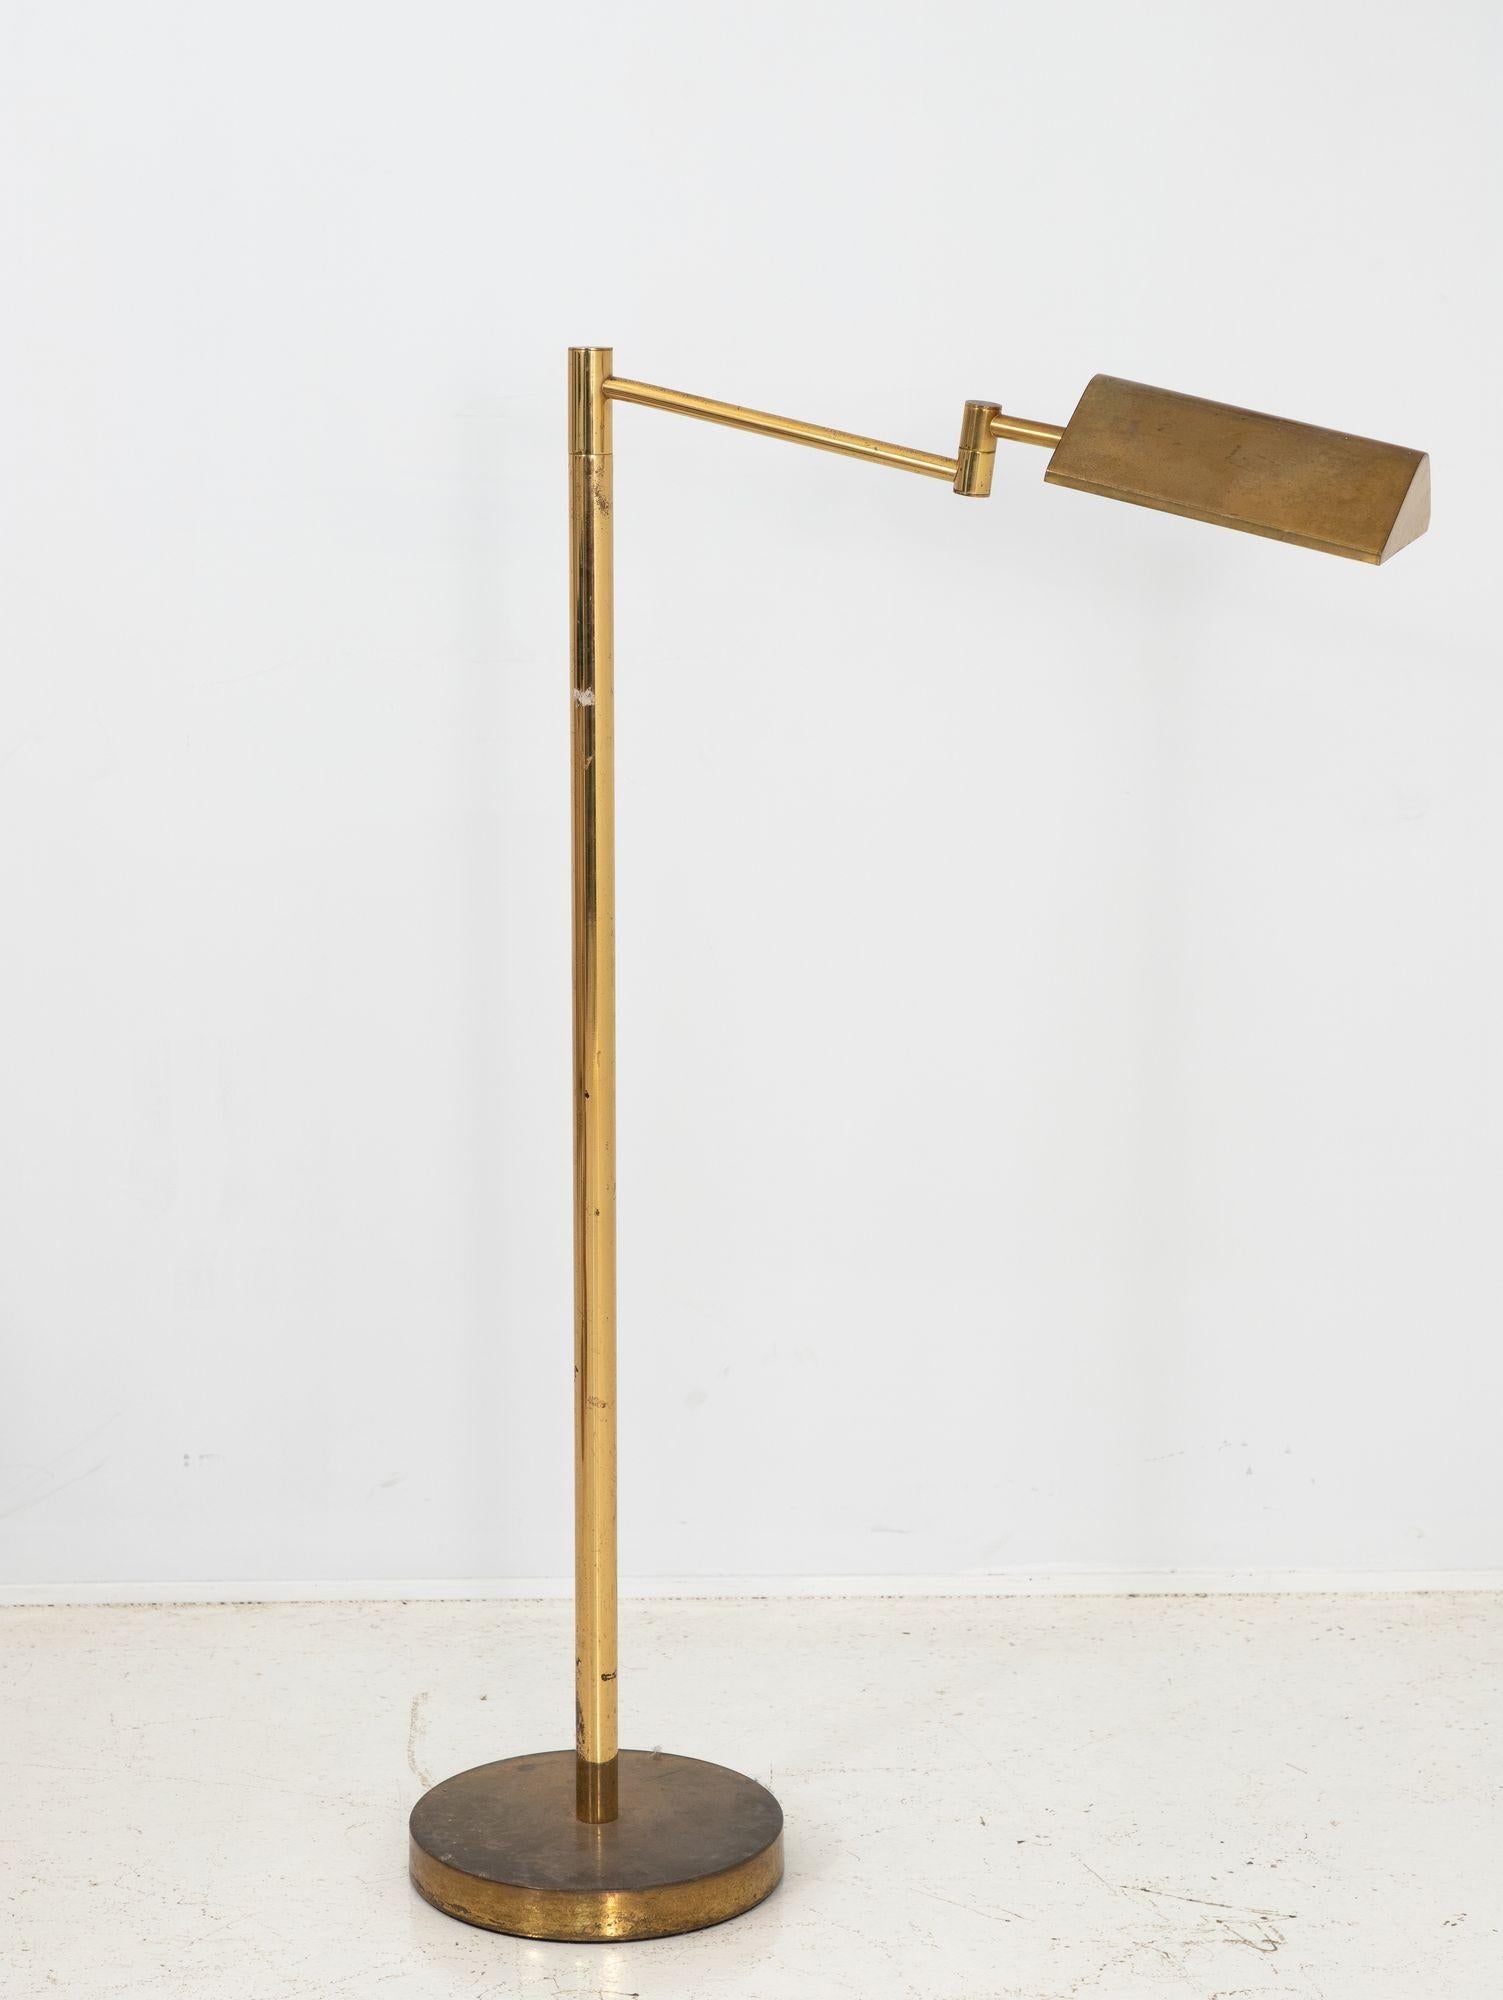 Illuminate your space with timeless elegance using this vintage brass floor lamp featuring a convenient swing arm. This lamp exudes sophistication and charm. The lustrous brass finish adds a touch of glamour to any room, while the swing arm allows